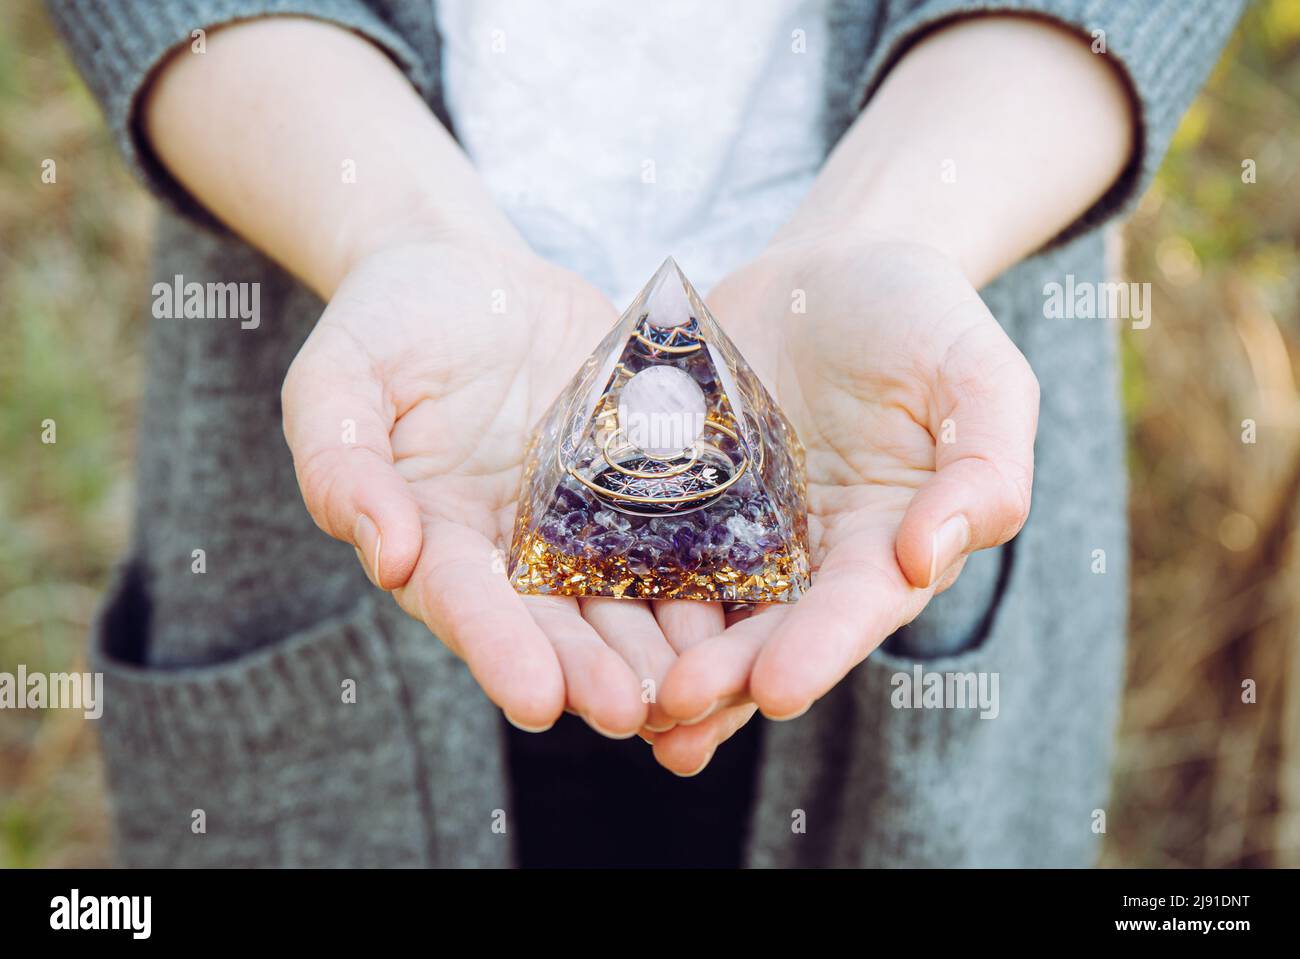 Close up view of woman hands holding and using Orgonite or Orgone pyramid. Converting negative energy to positive energy and have healing powers. Stock Photo